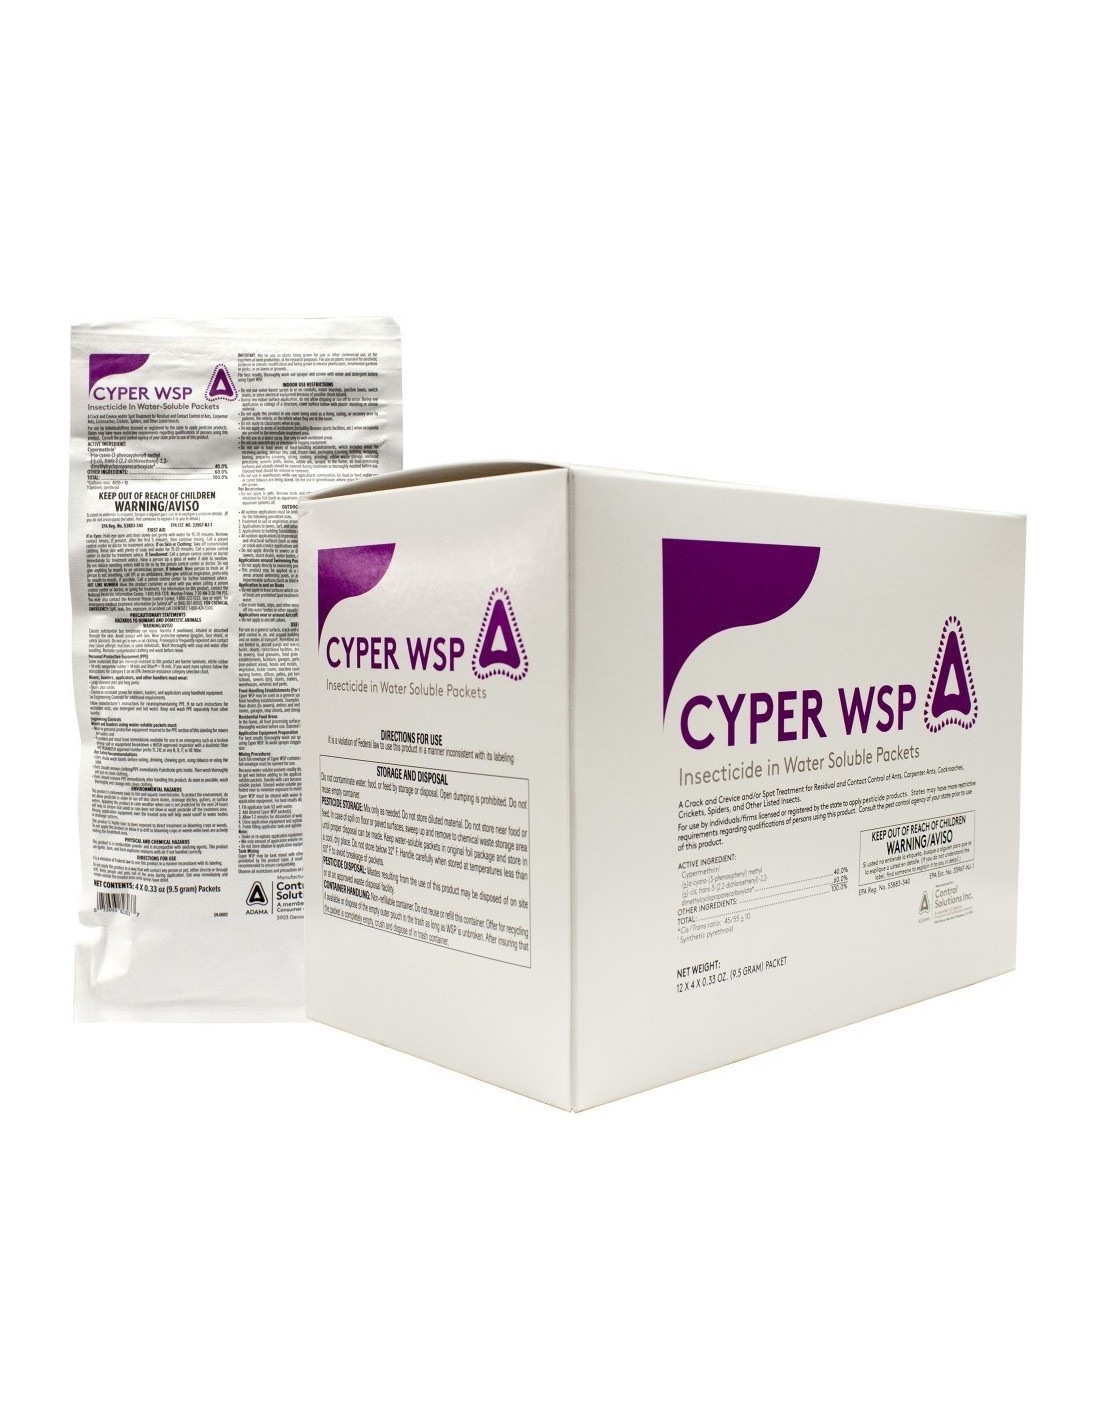 Cyper WSP Insecticide In Water Soluble Sachets Questions & Answers